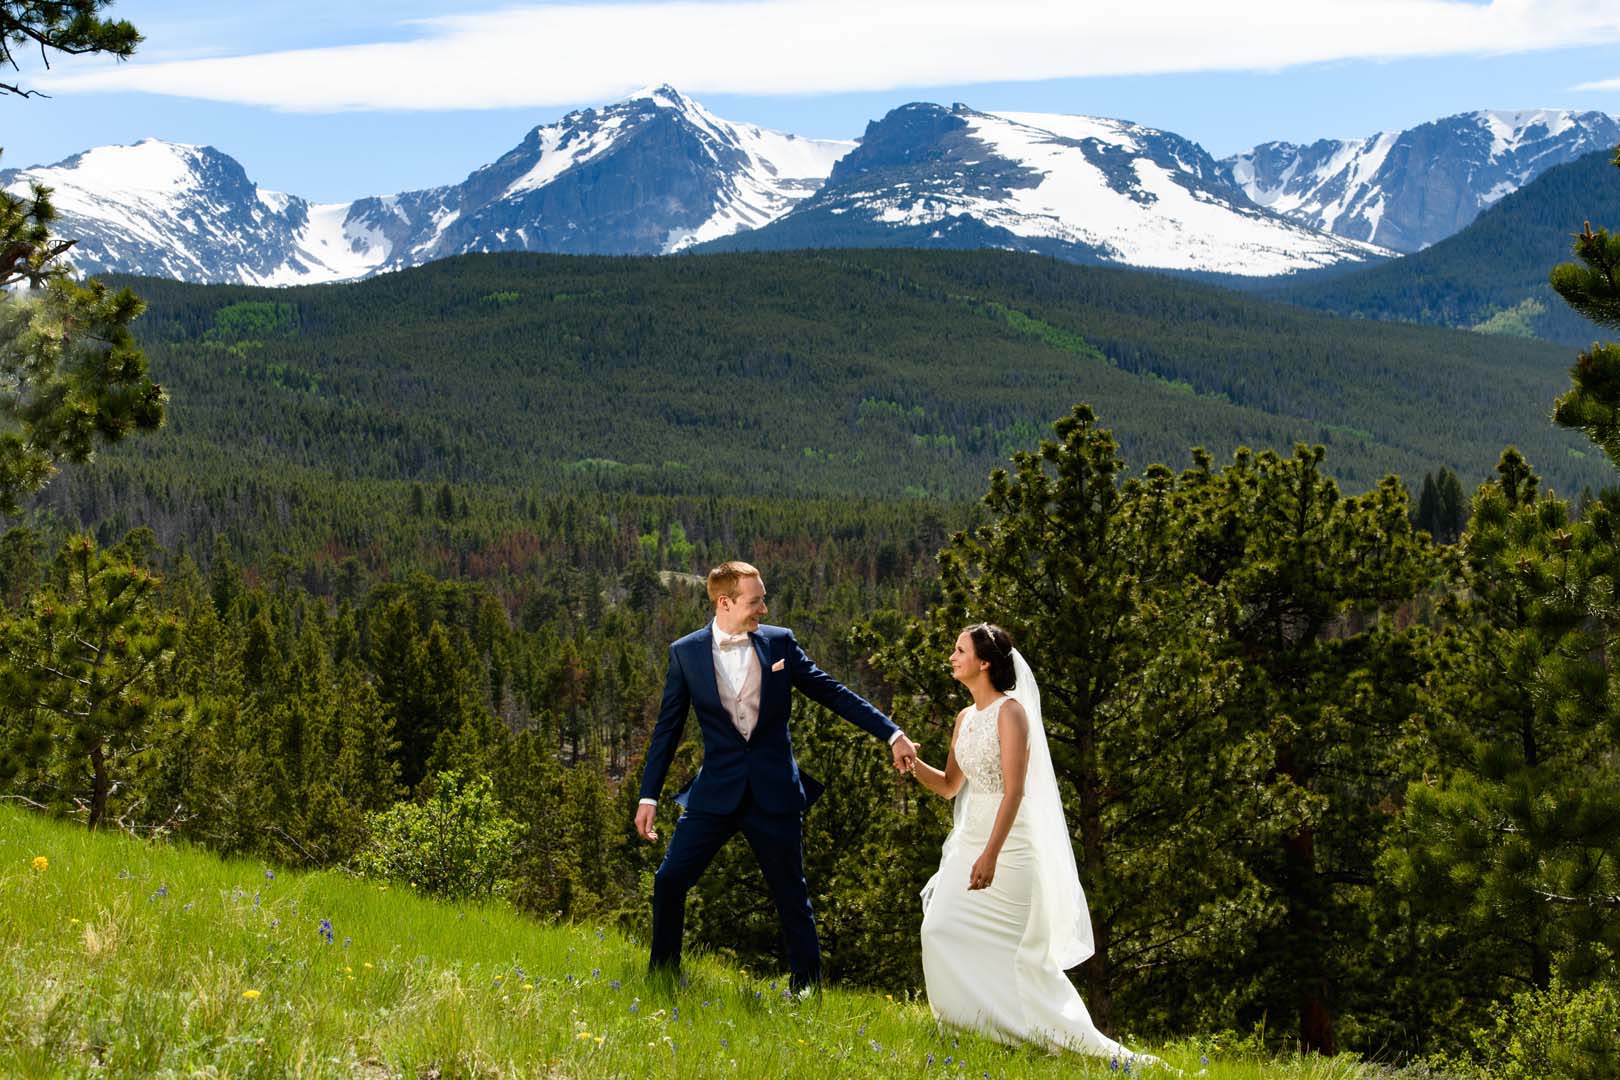 Couple walking in the grass with beautiful snow capped mountains in the background